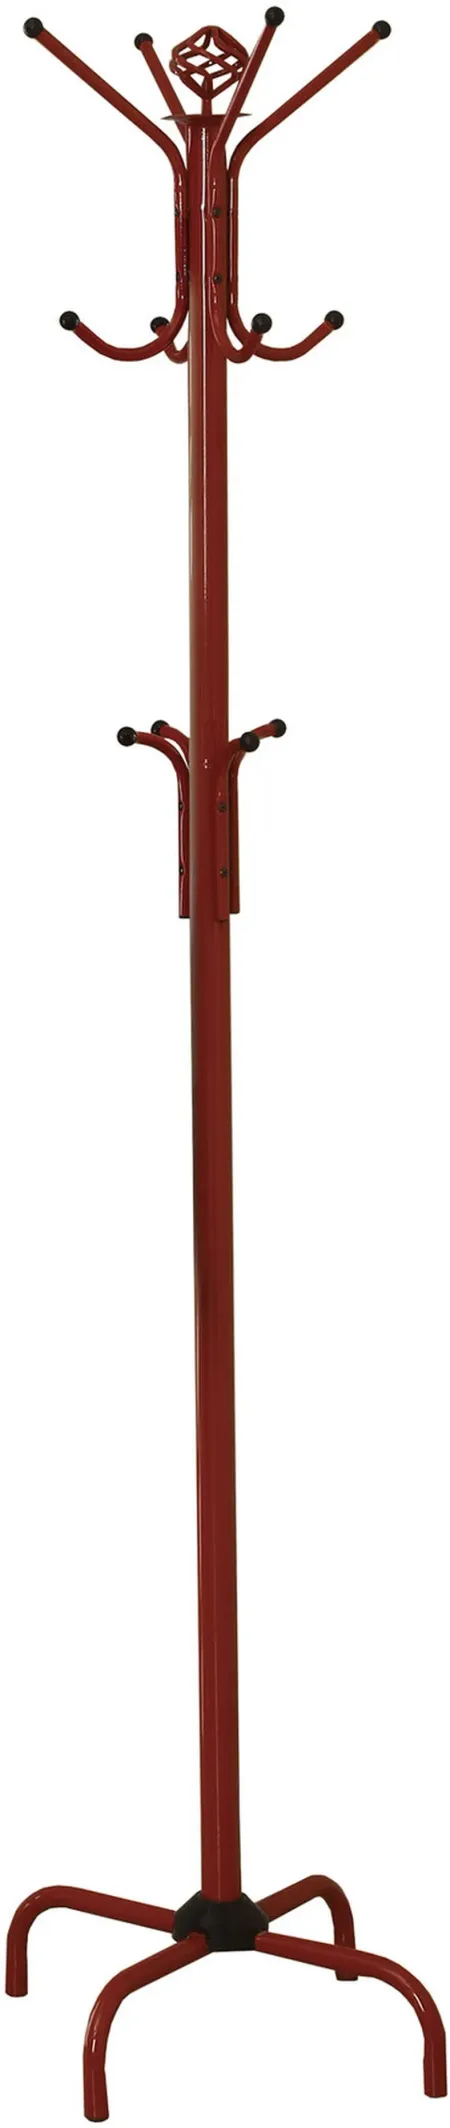 Coat Rack, Hall Tree, Free Standing, 12 Hooks, Entryway, 70"H, Bedroom, Metal, Red, Red, Contemporary, Modern